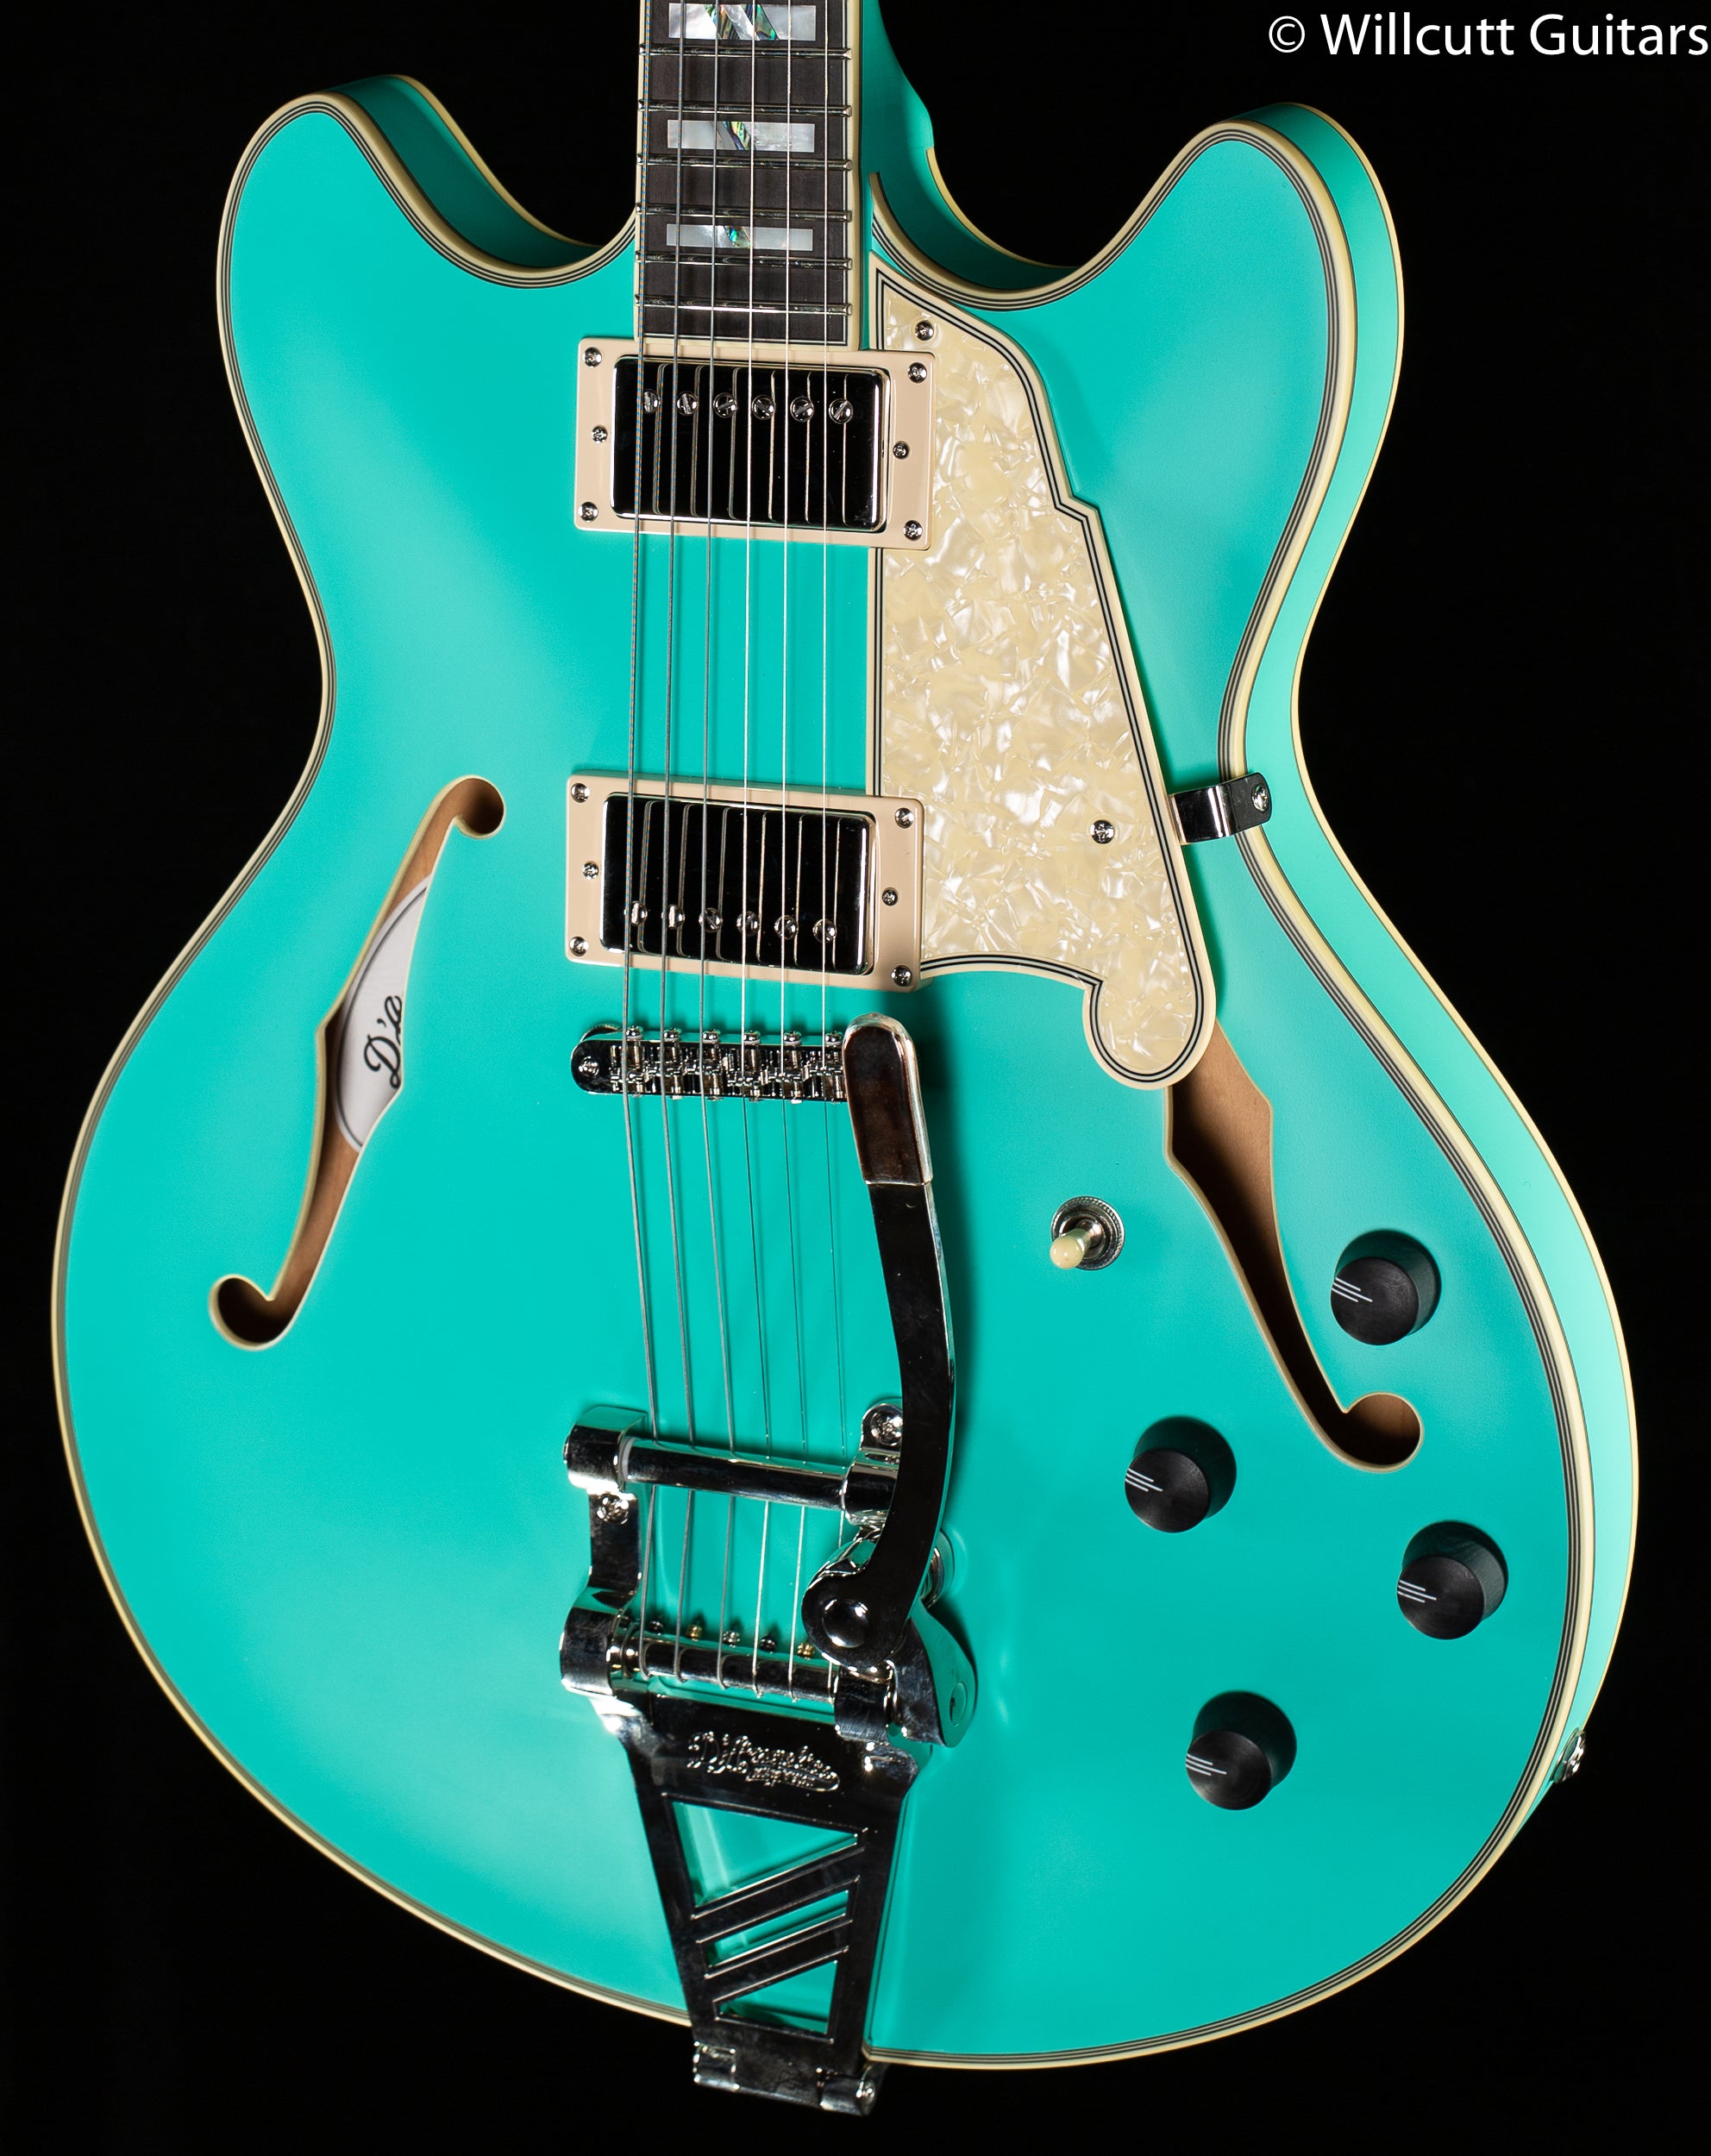 D'Angelico Deluxe DC Limited Edition Matte Surf Green - Willcutt 